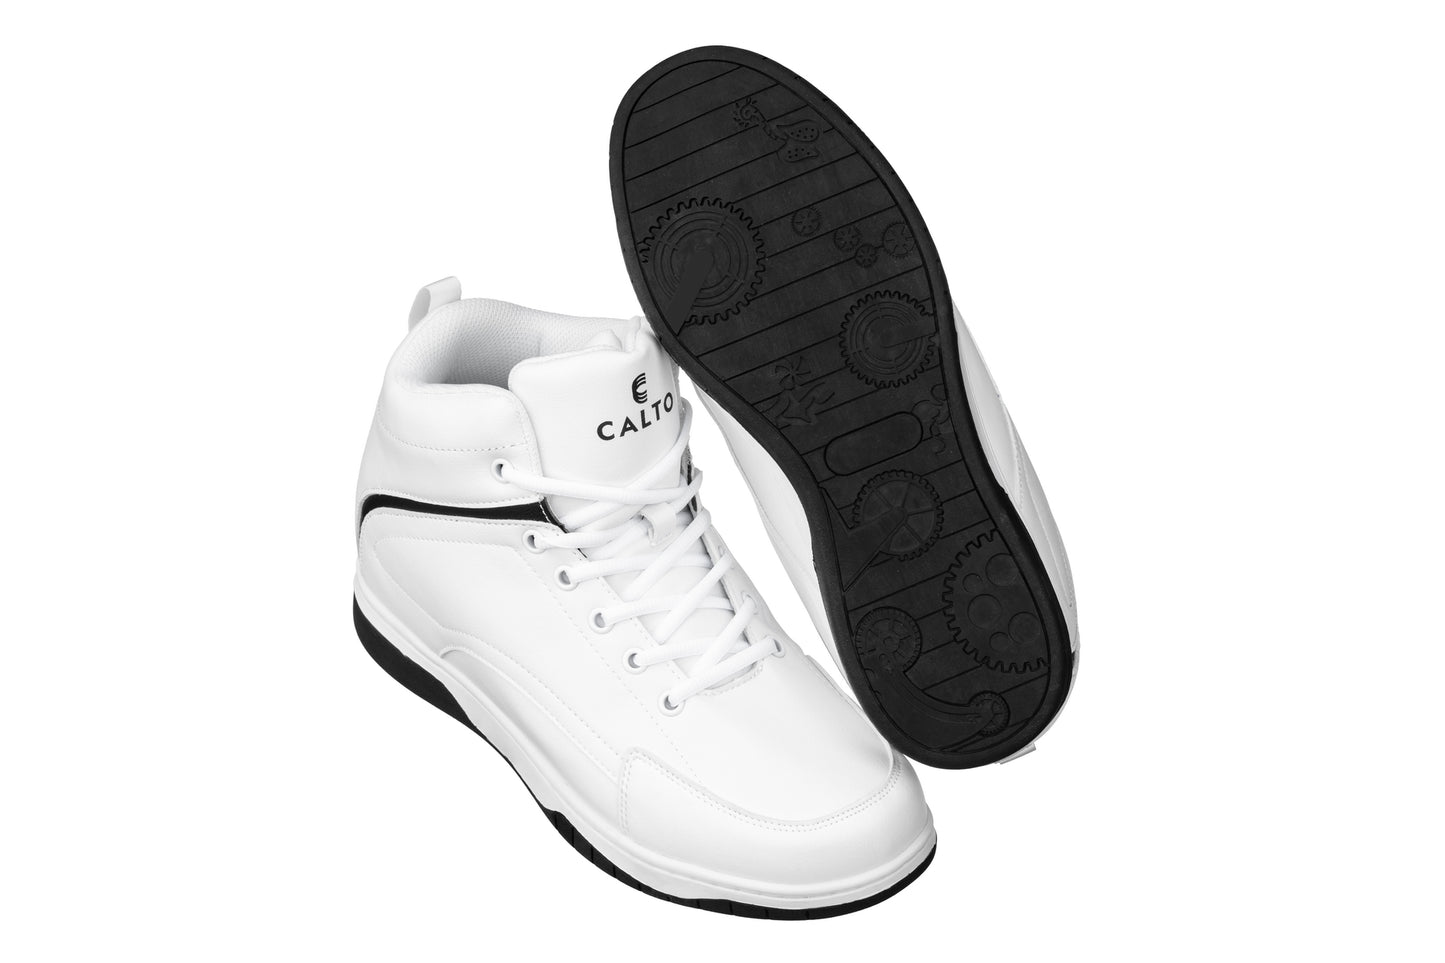 Elevator shoes height increase CALTO - S3265 - 3.2 Inches Taller (White/Black) - Sneakers